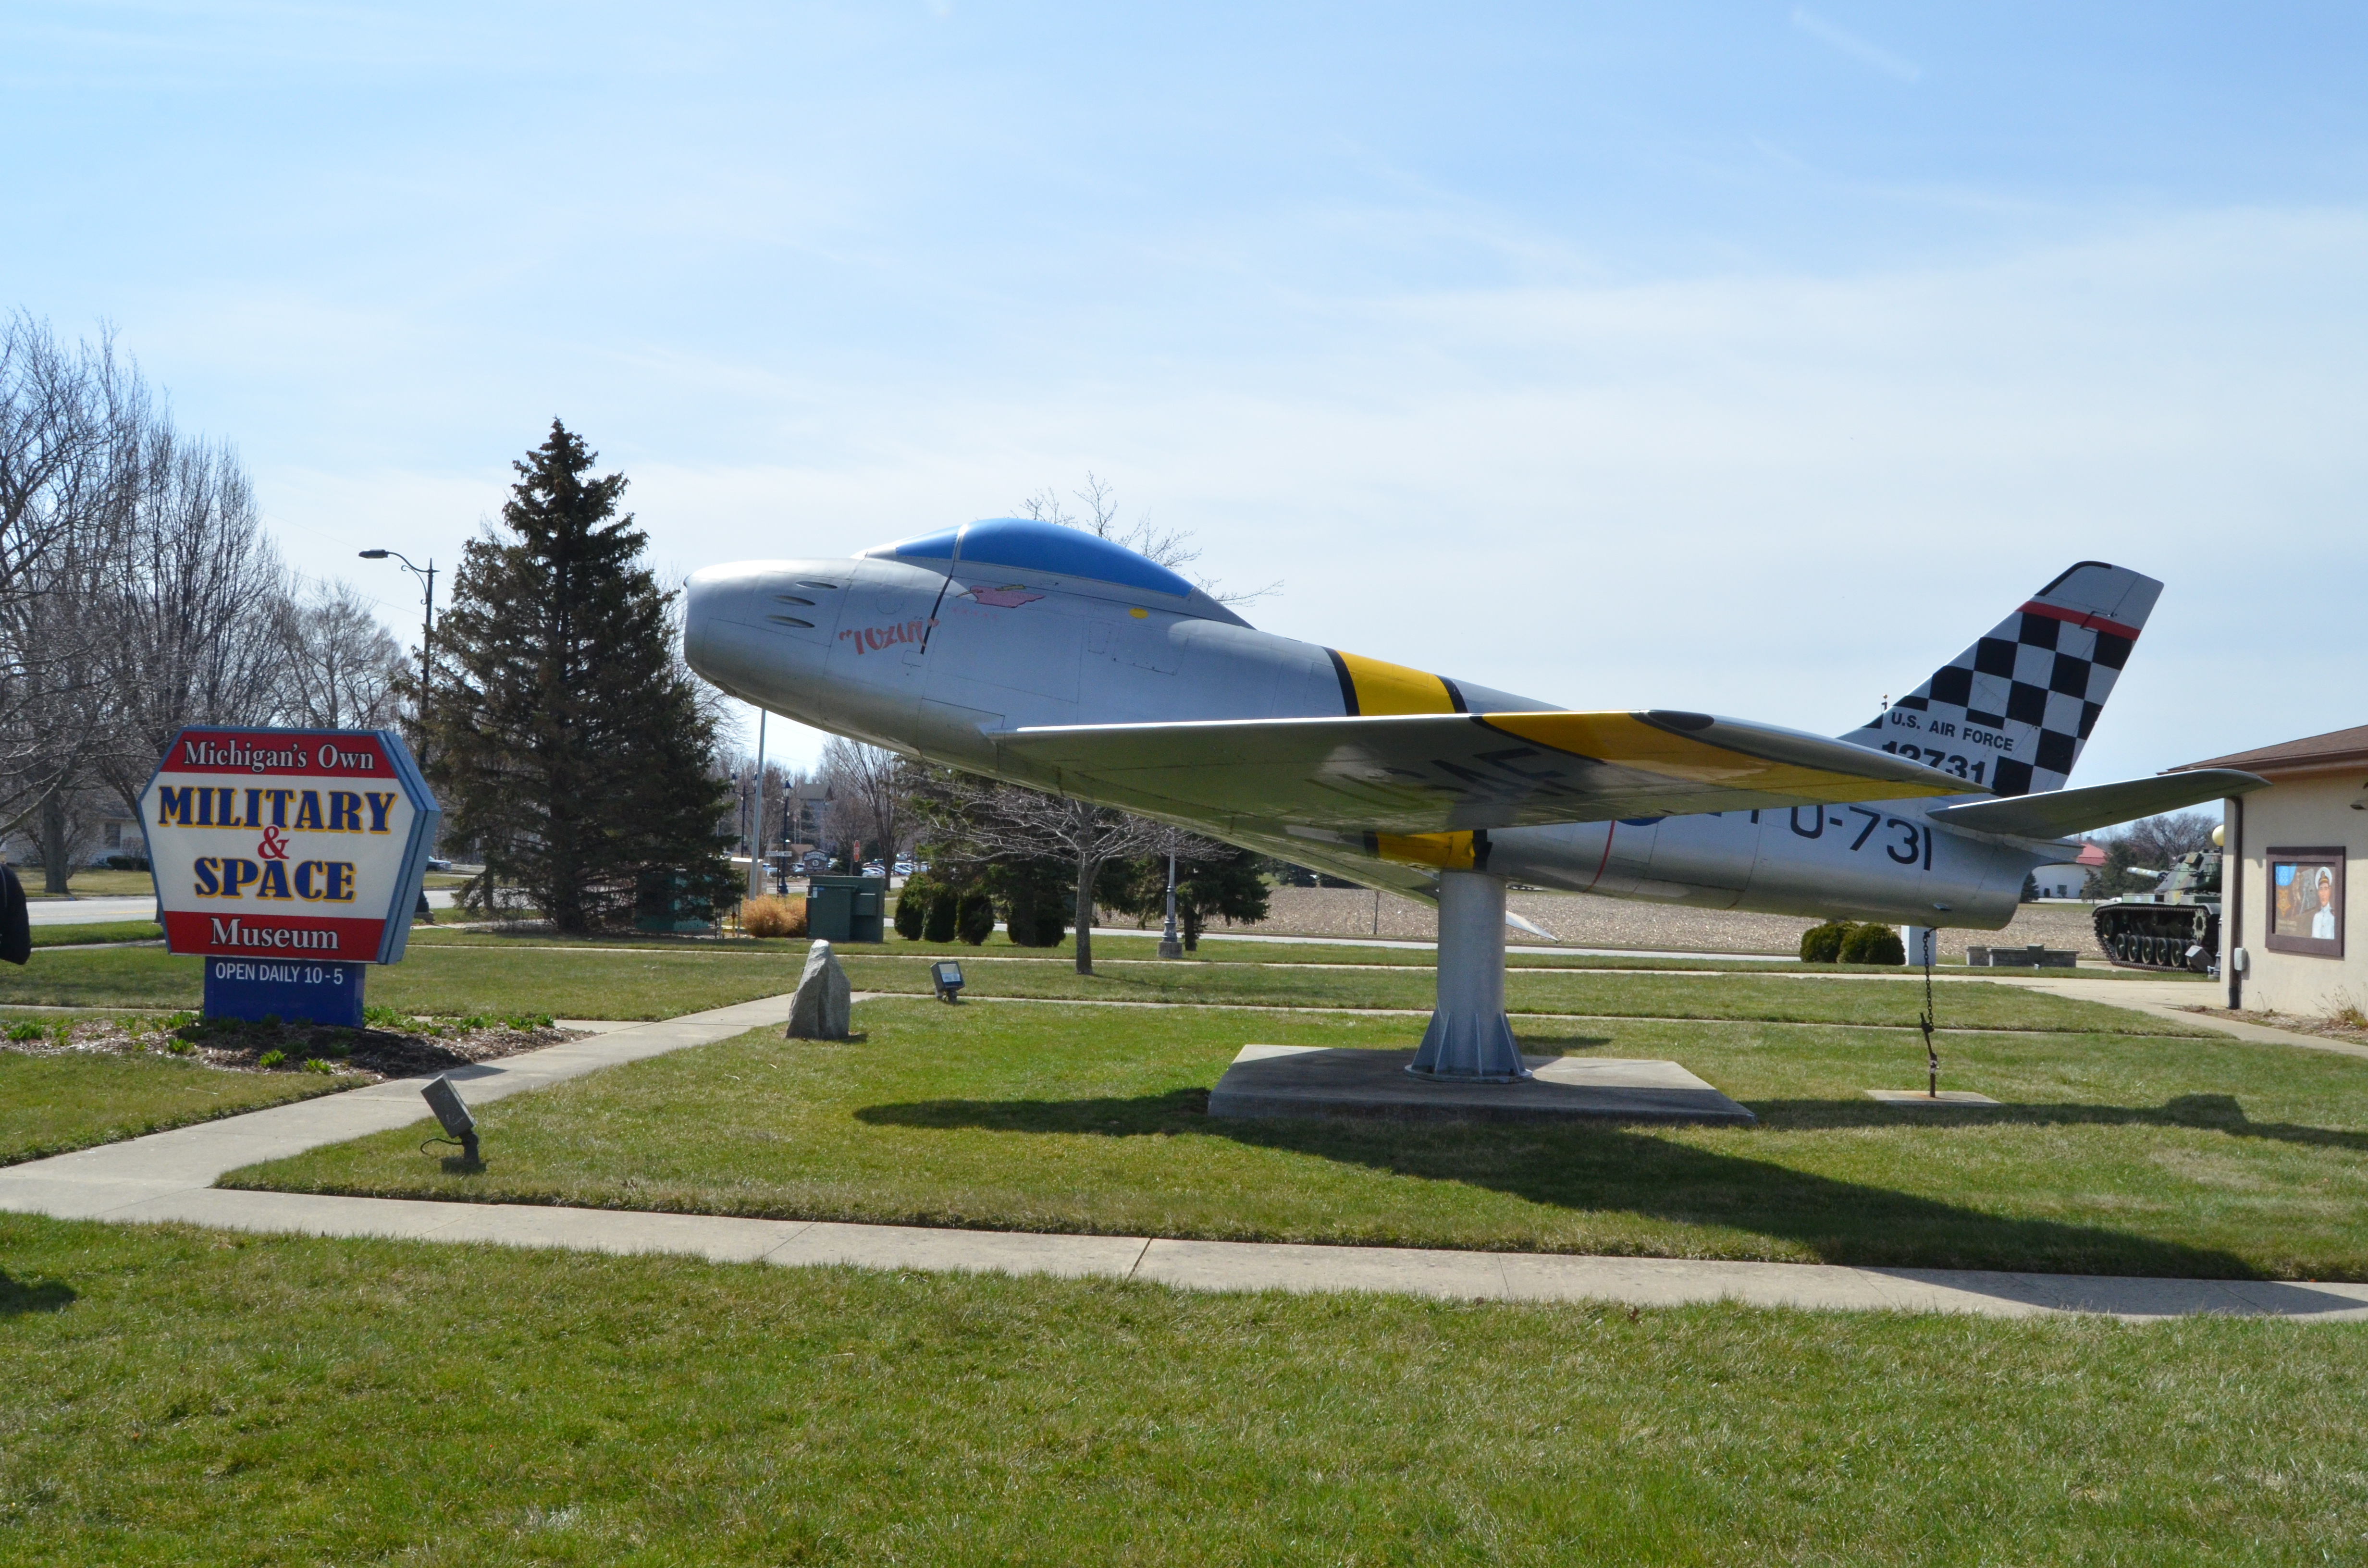 Michigan's Own Military and Space Heroes Museum F-86 Saberjet Display